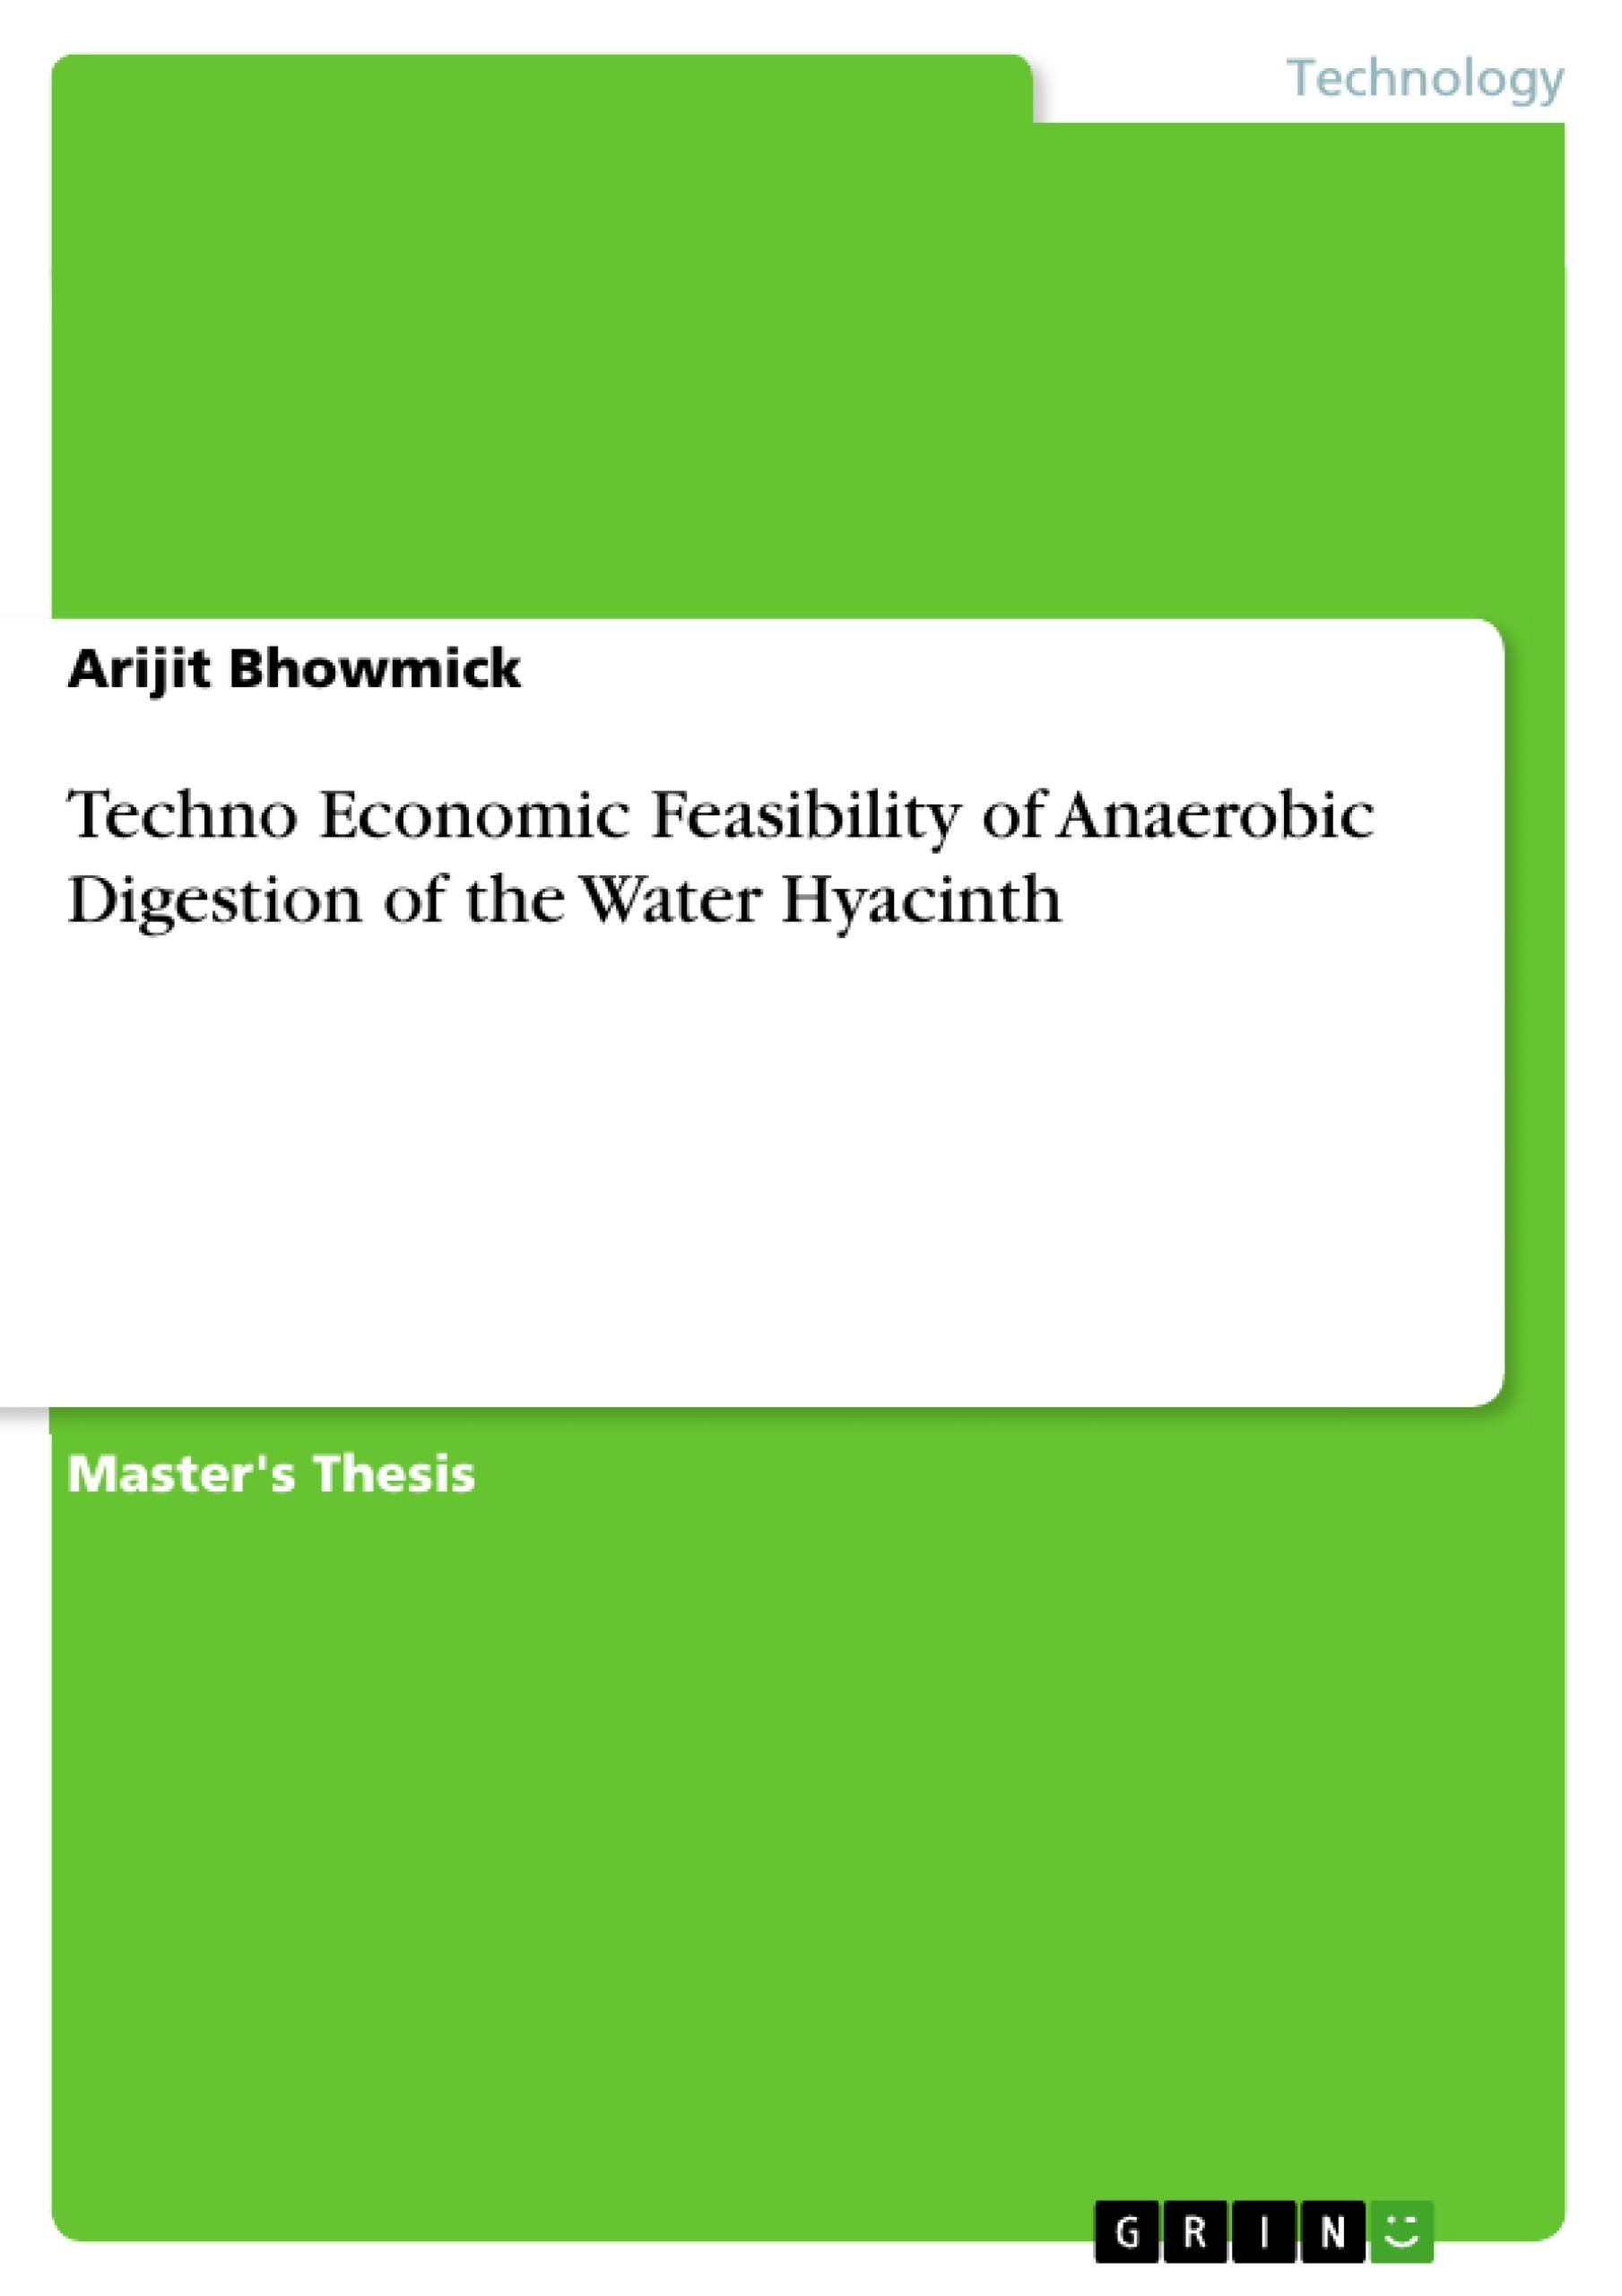 Titel: Techno Economic Feasibility of Anaerobic Digestion of the Water Hyacinth